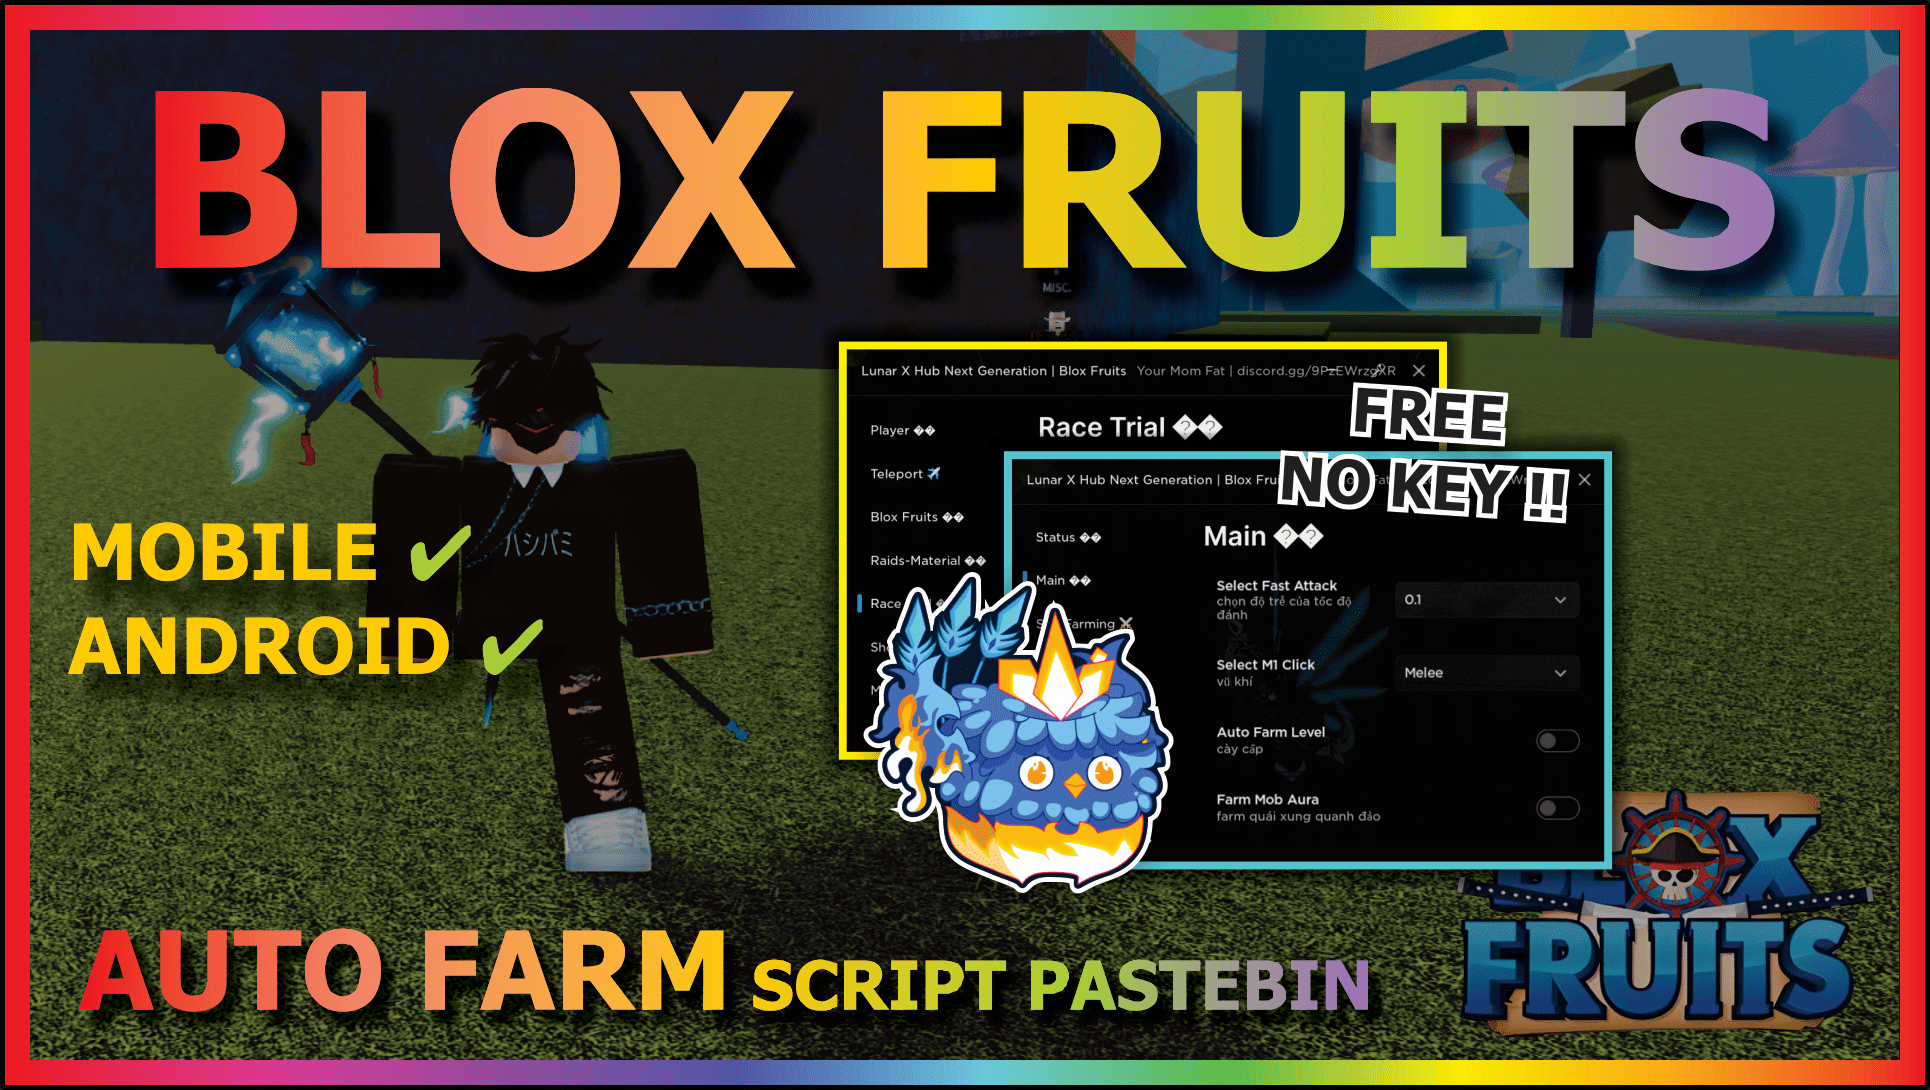 You are currently viewing BLOX FRUITS (LUNAR X)